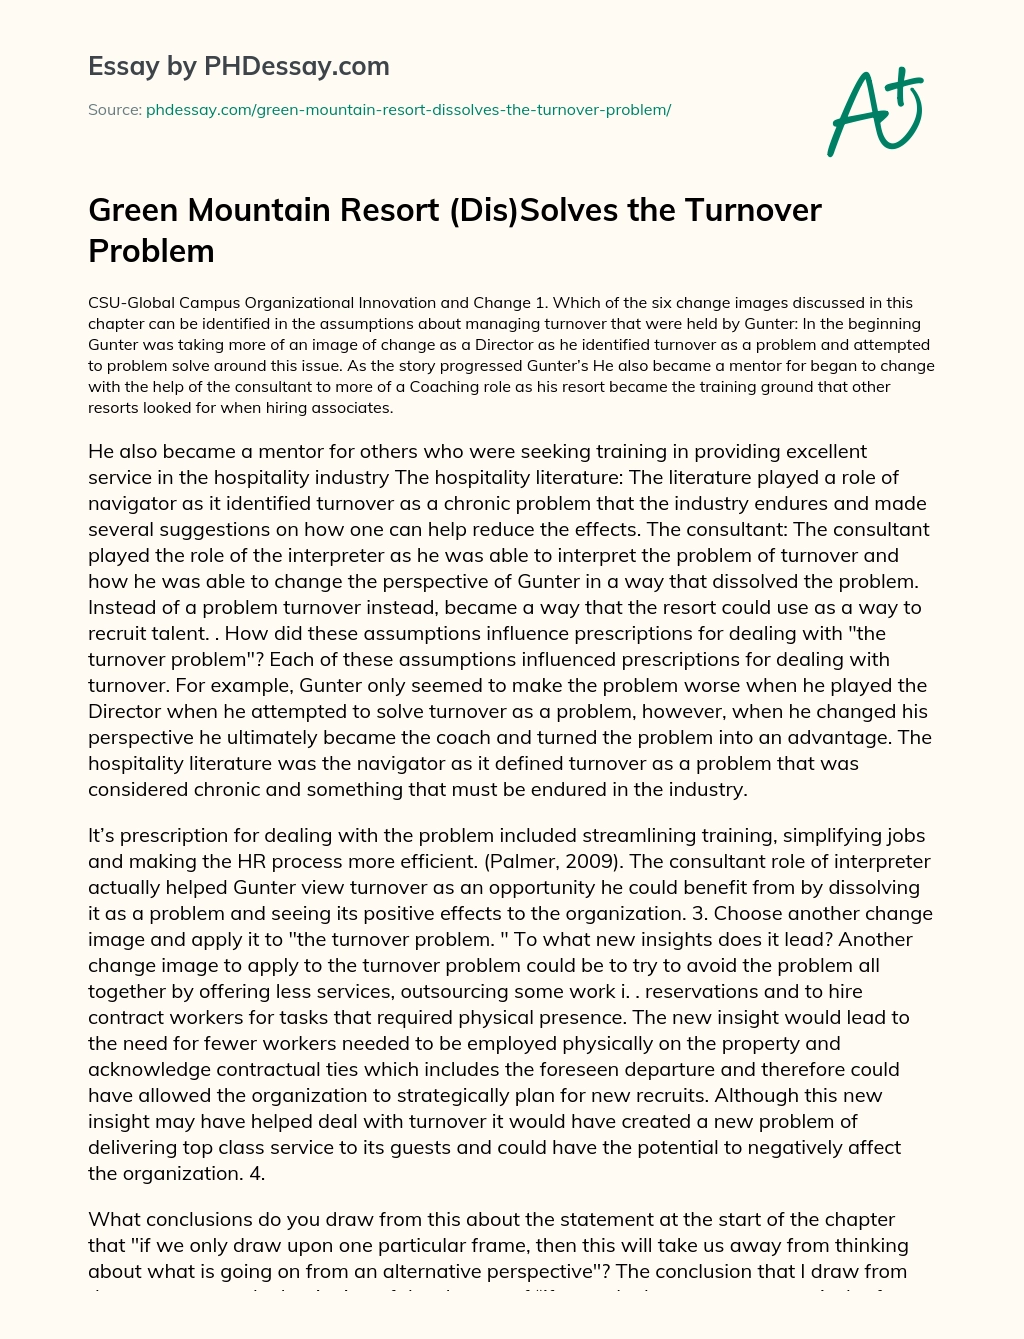 Green Mountain Resort (Dis)Solves the Turnover Problem essay